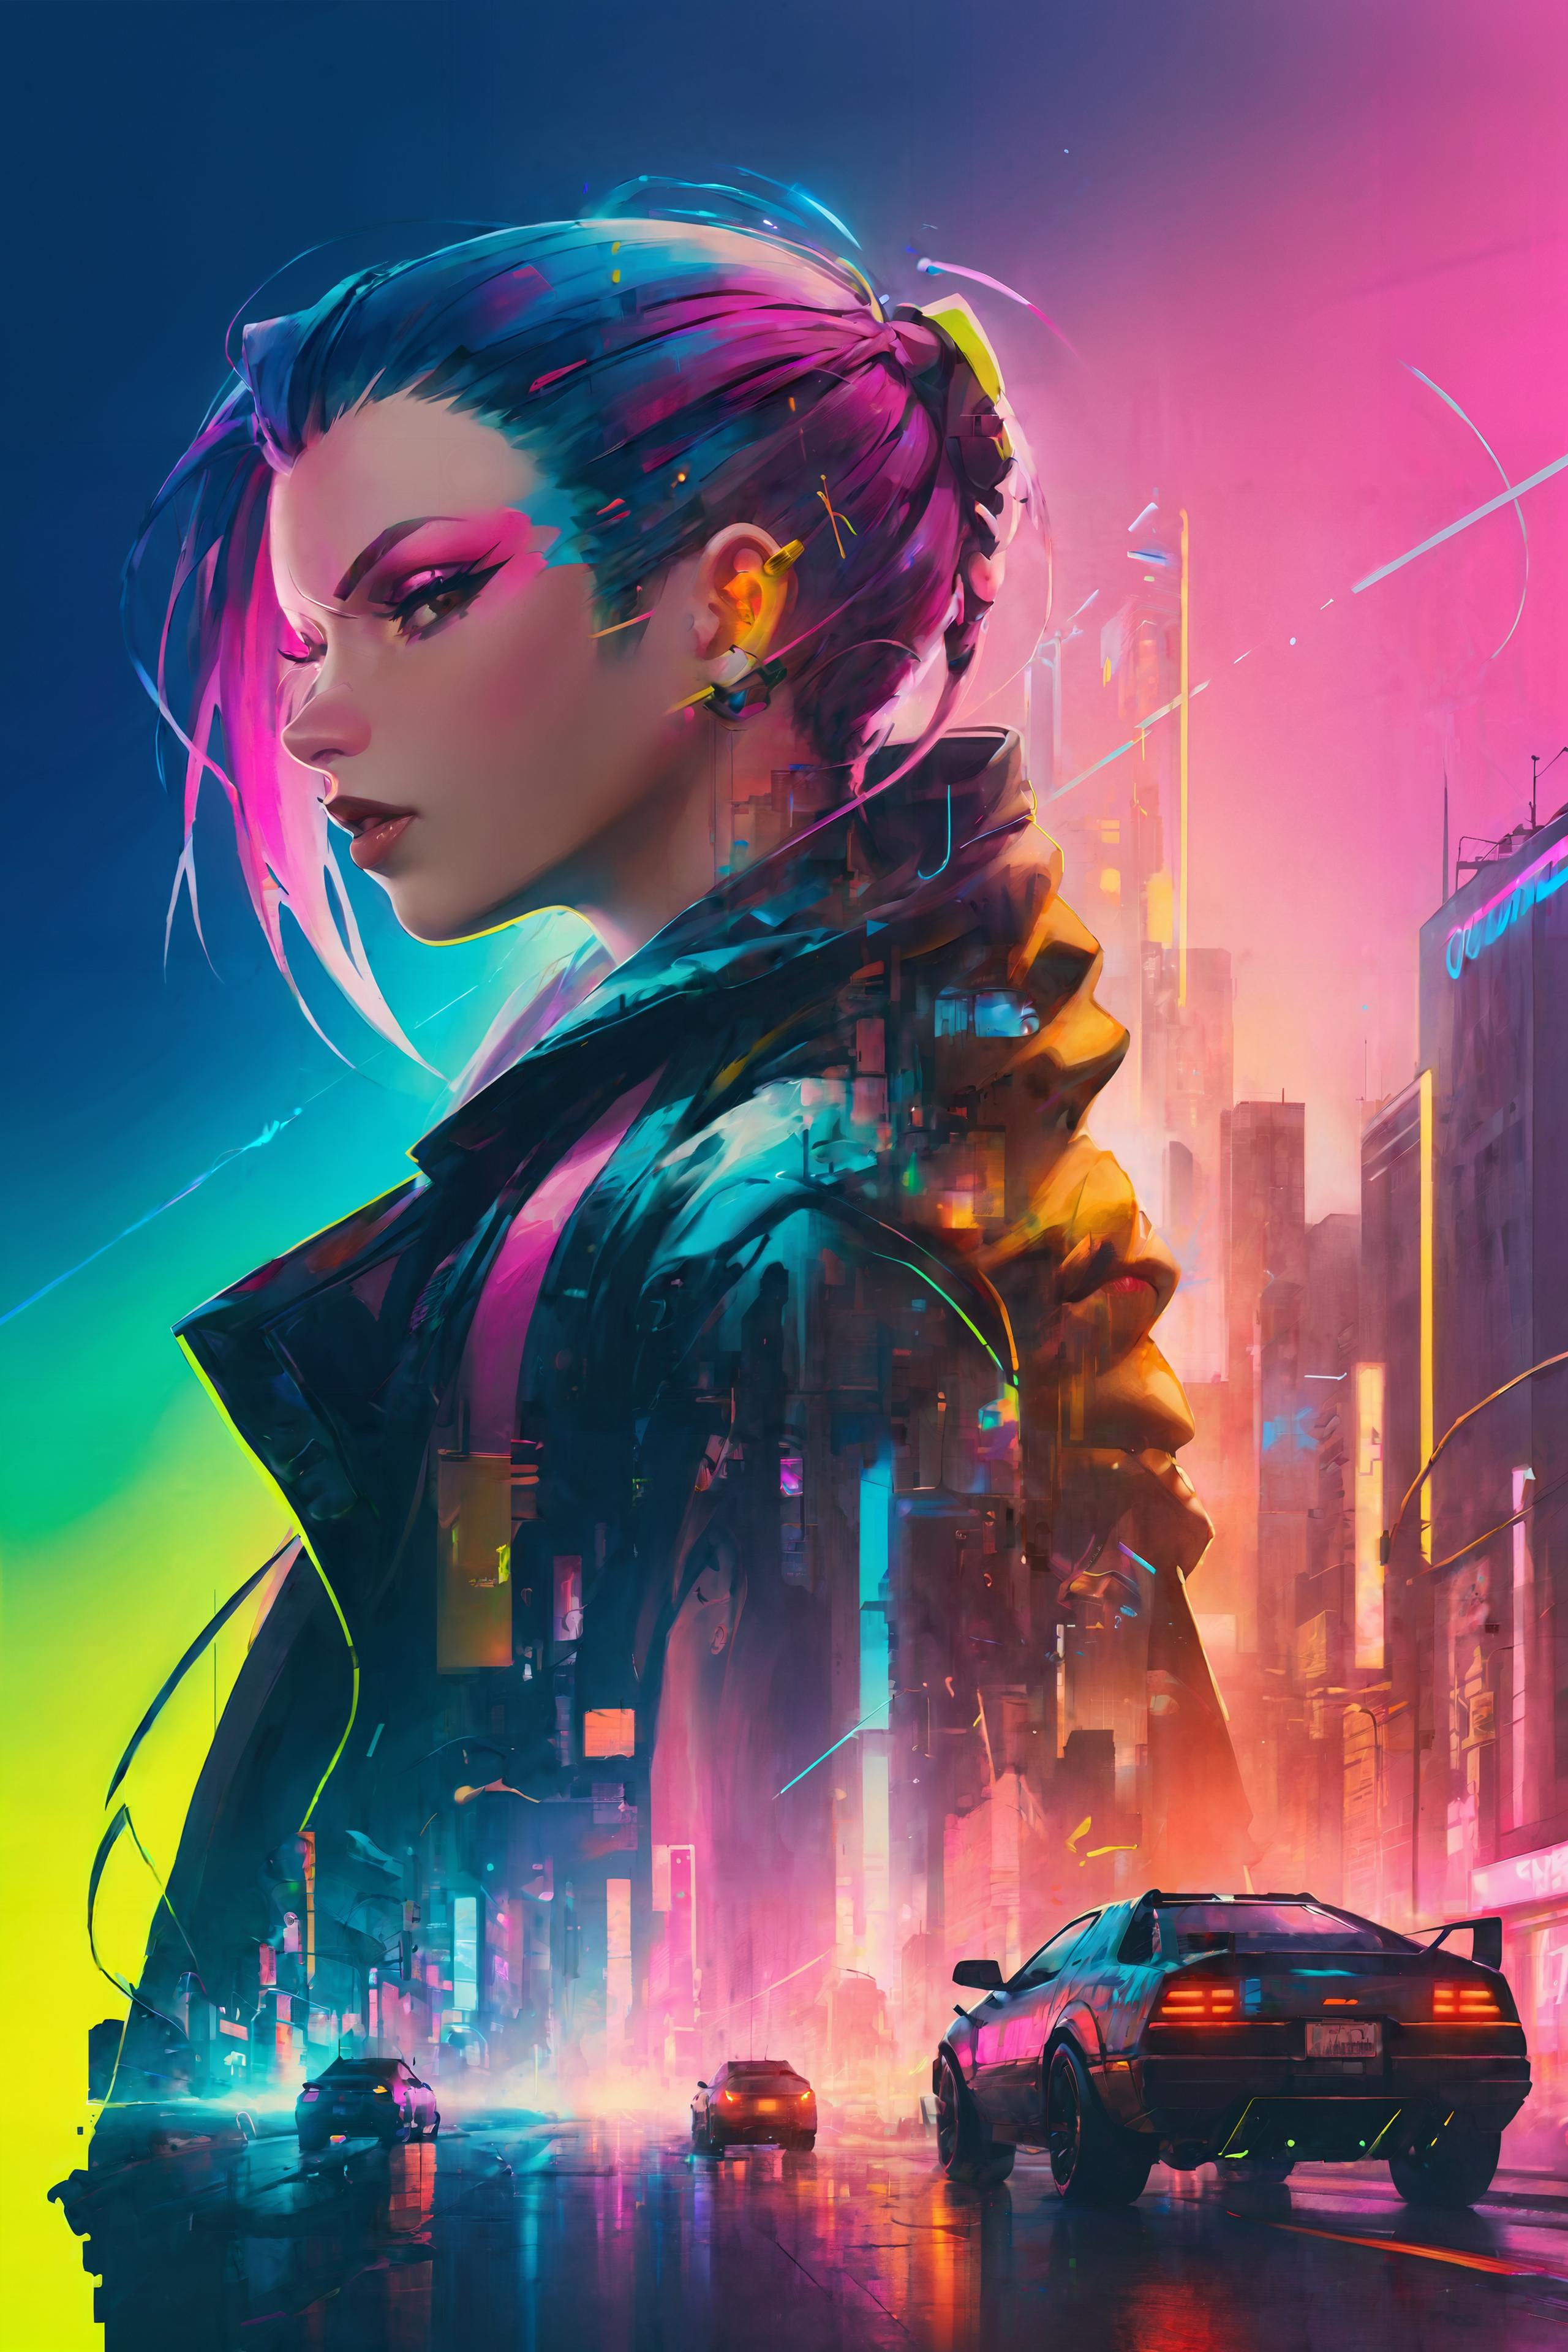 Anime-Inspired Artwork of a Woman with Pink and Blue Hair and a Black Jacket Standing in Front of a Cityscape